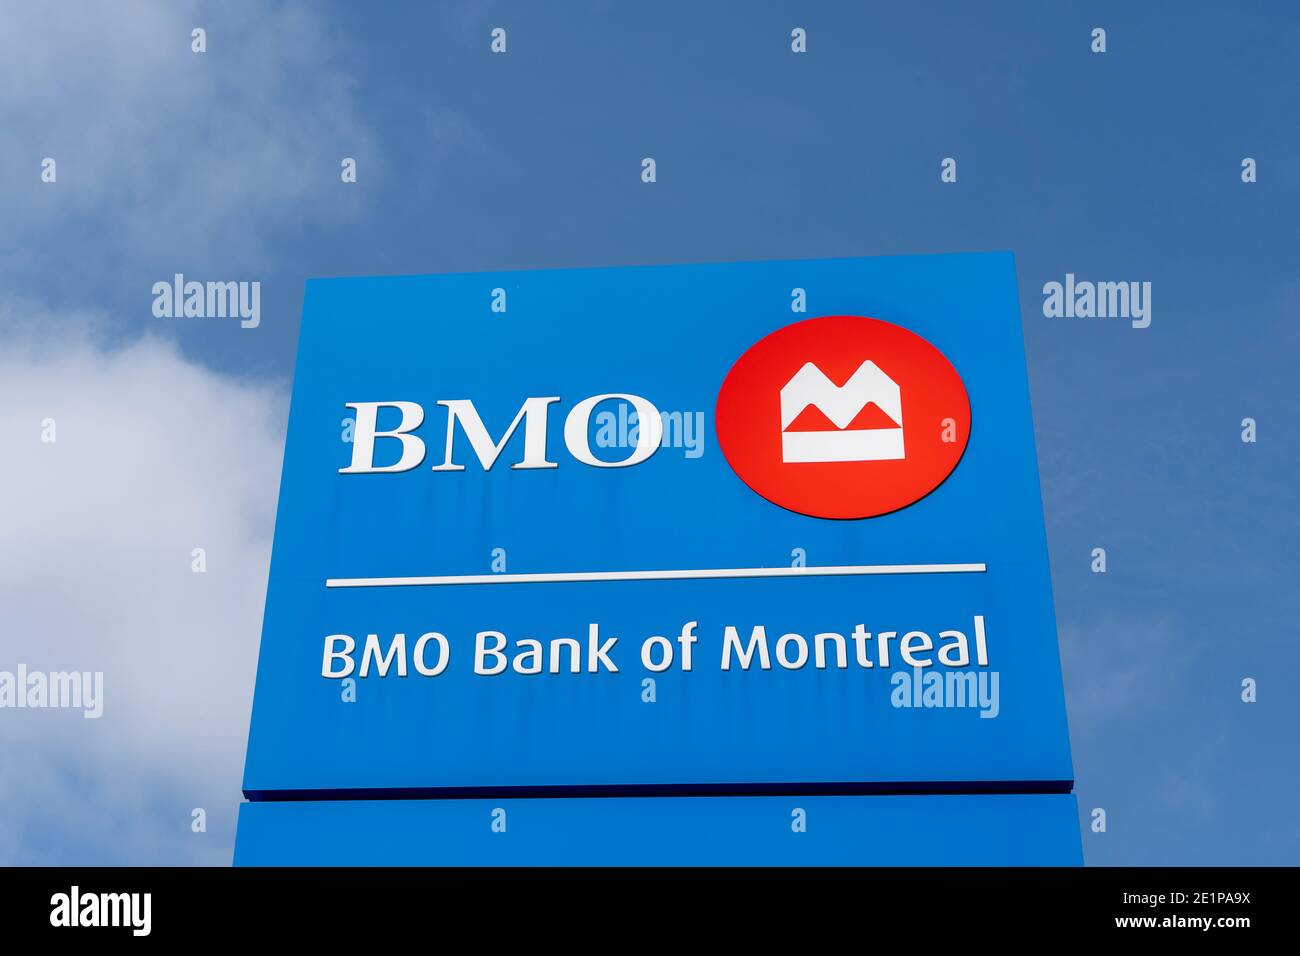 Cambridge, On, Canada- September 27, 2020: Close up of  BMO (Bank of Montreal) sign with blue sky in background in Cambridge, Ontario, Canada. Stock Photo